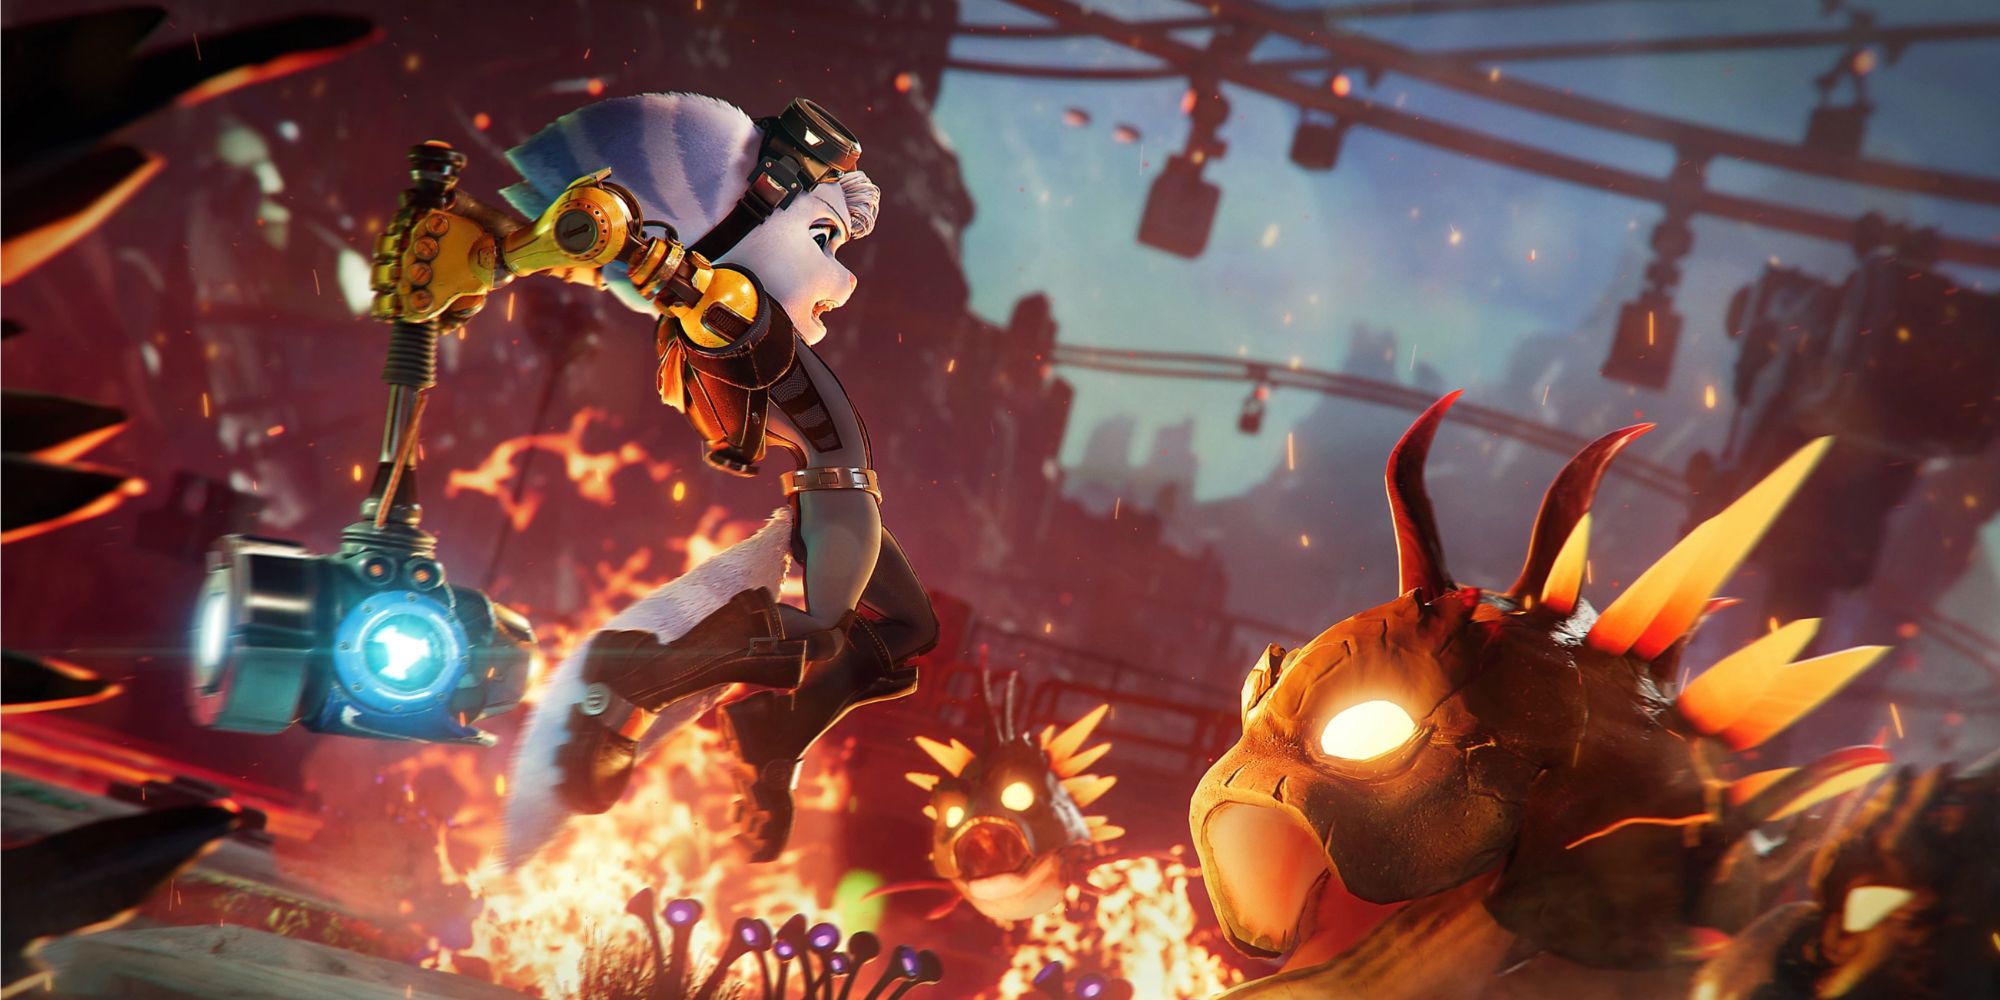 Ratchet & Clank: Rift Apart's PC port is one of Sony's best